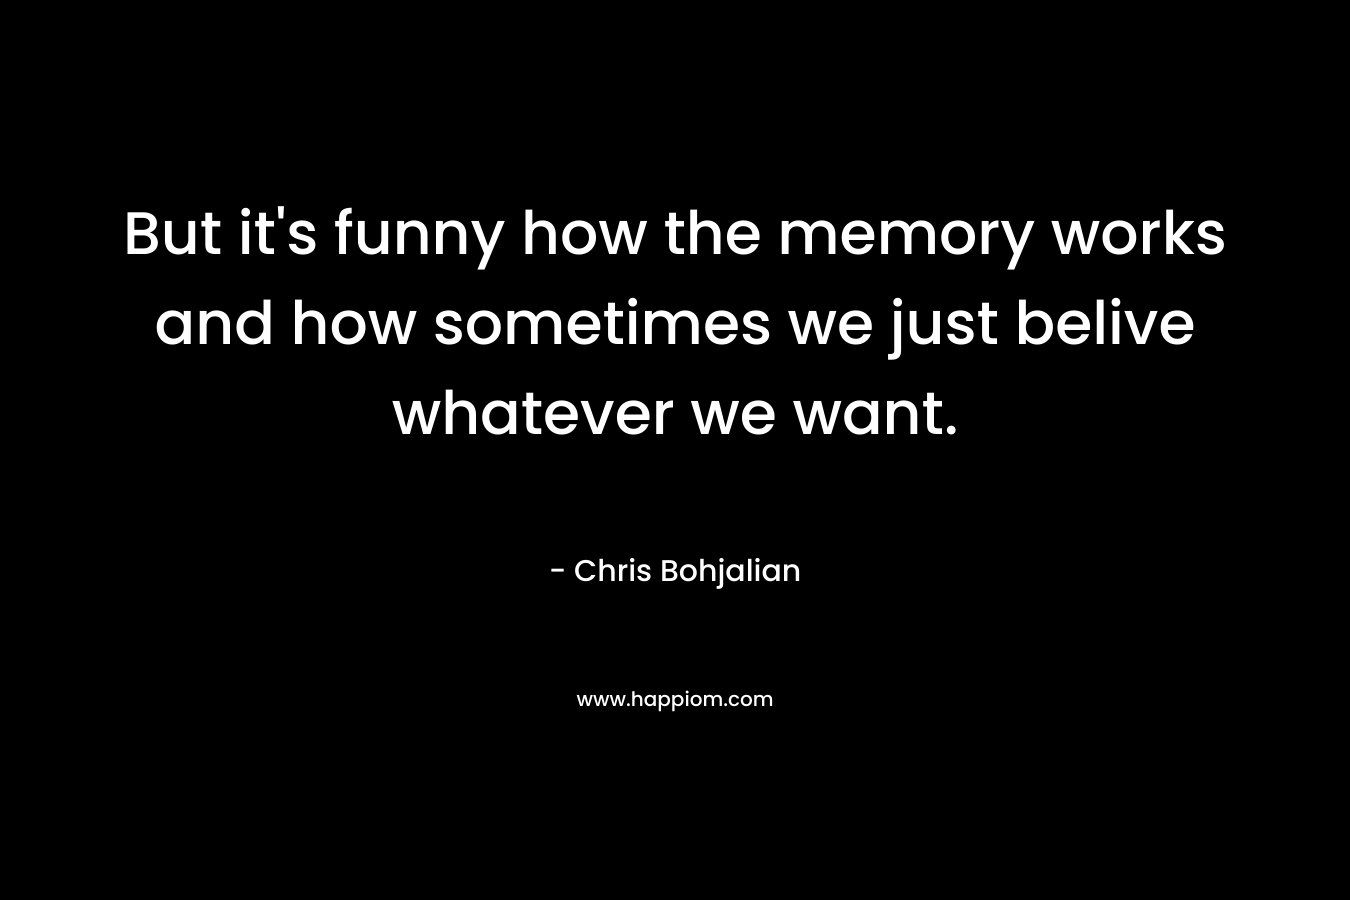 But it's funny how the memory works and how sometimes we just belive whatever we want.